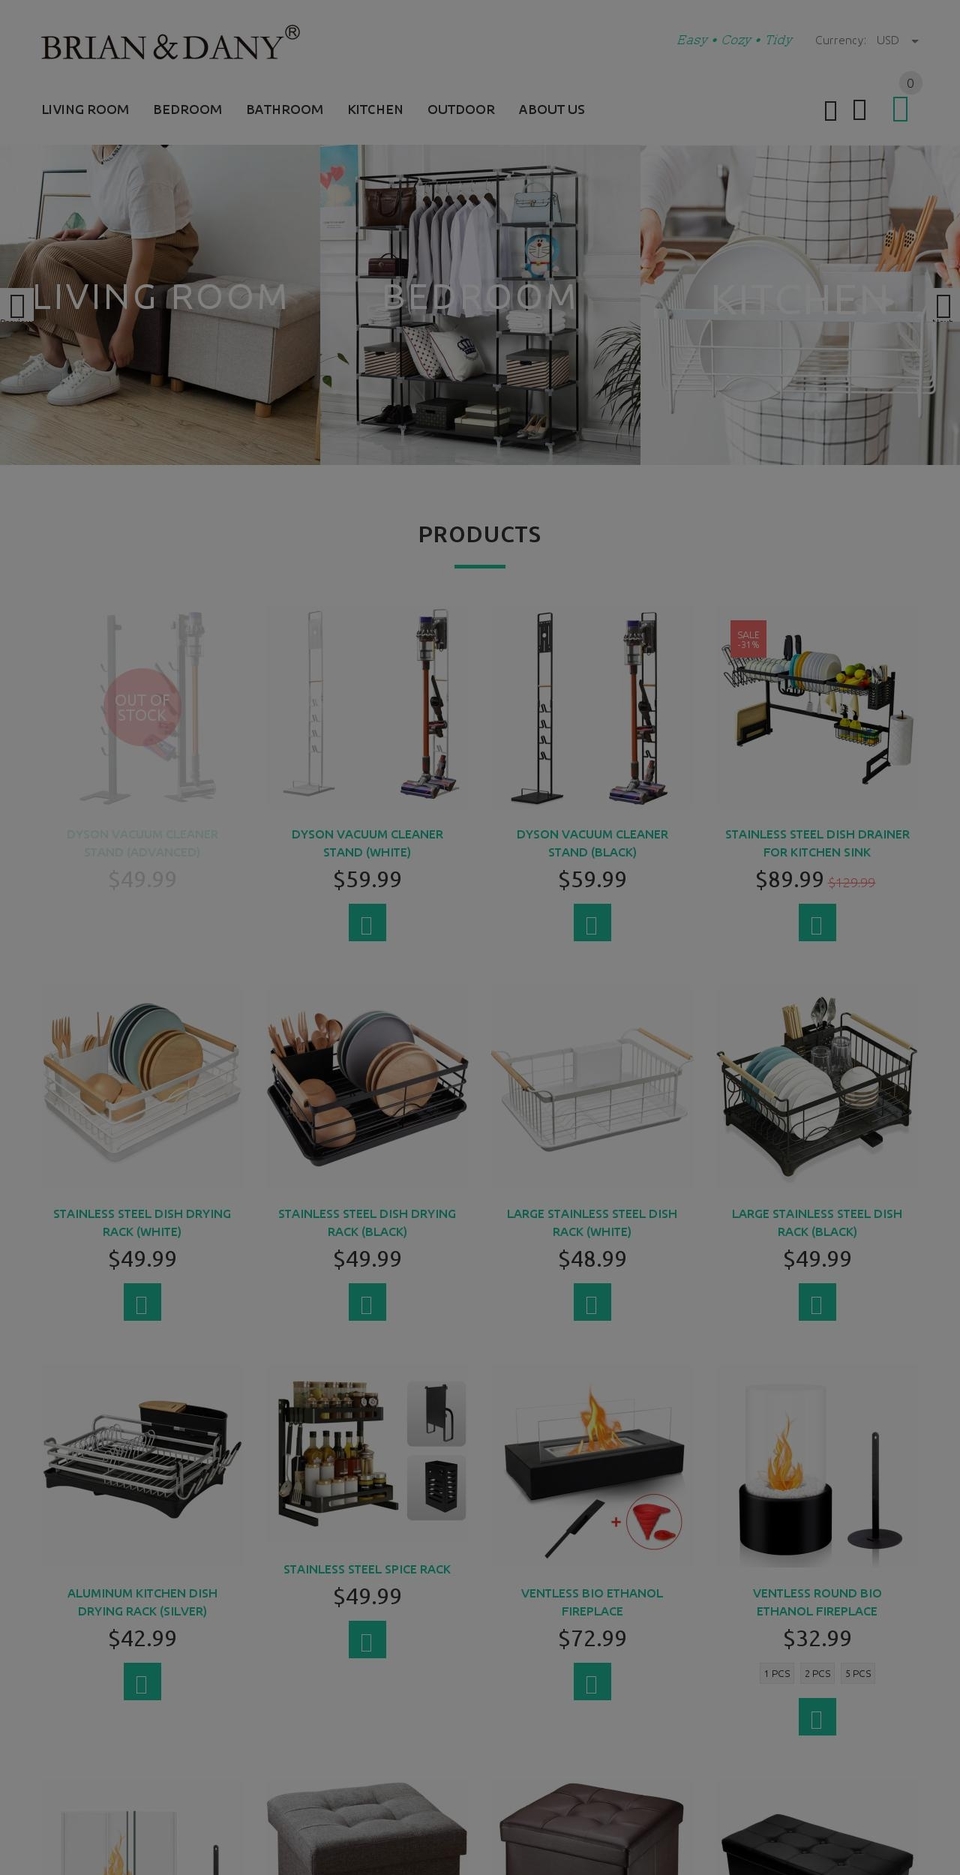 yourstore-v2-1-5 Shopify theme site example briananddany.com